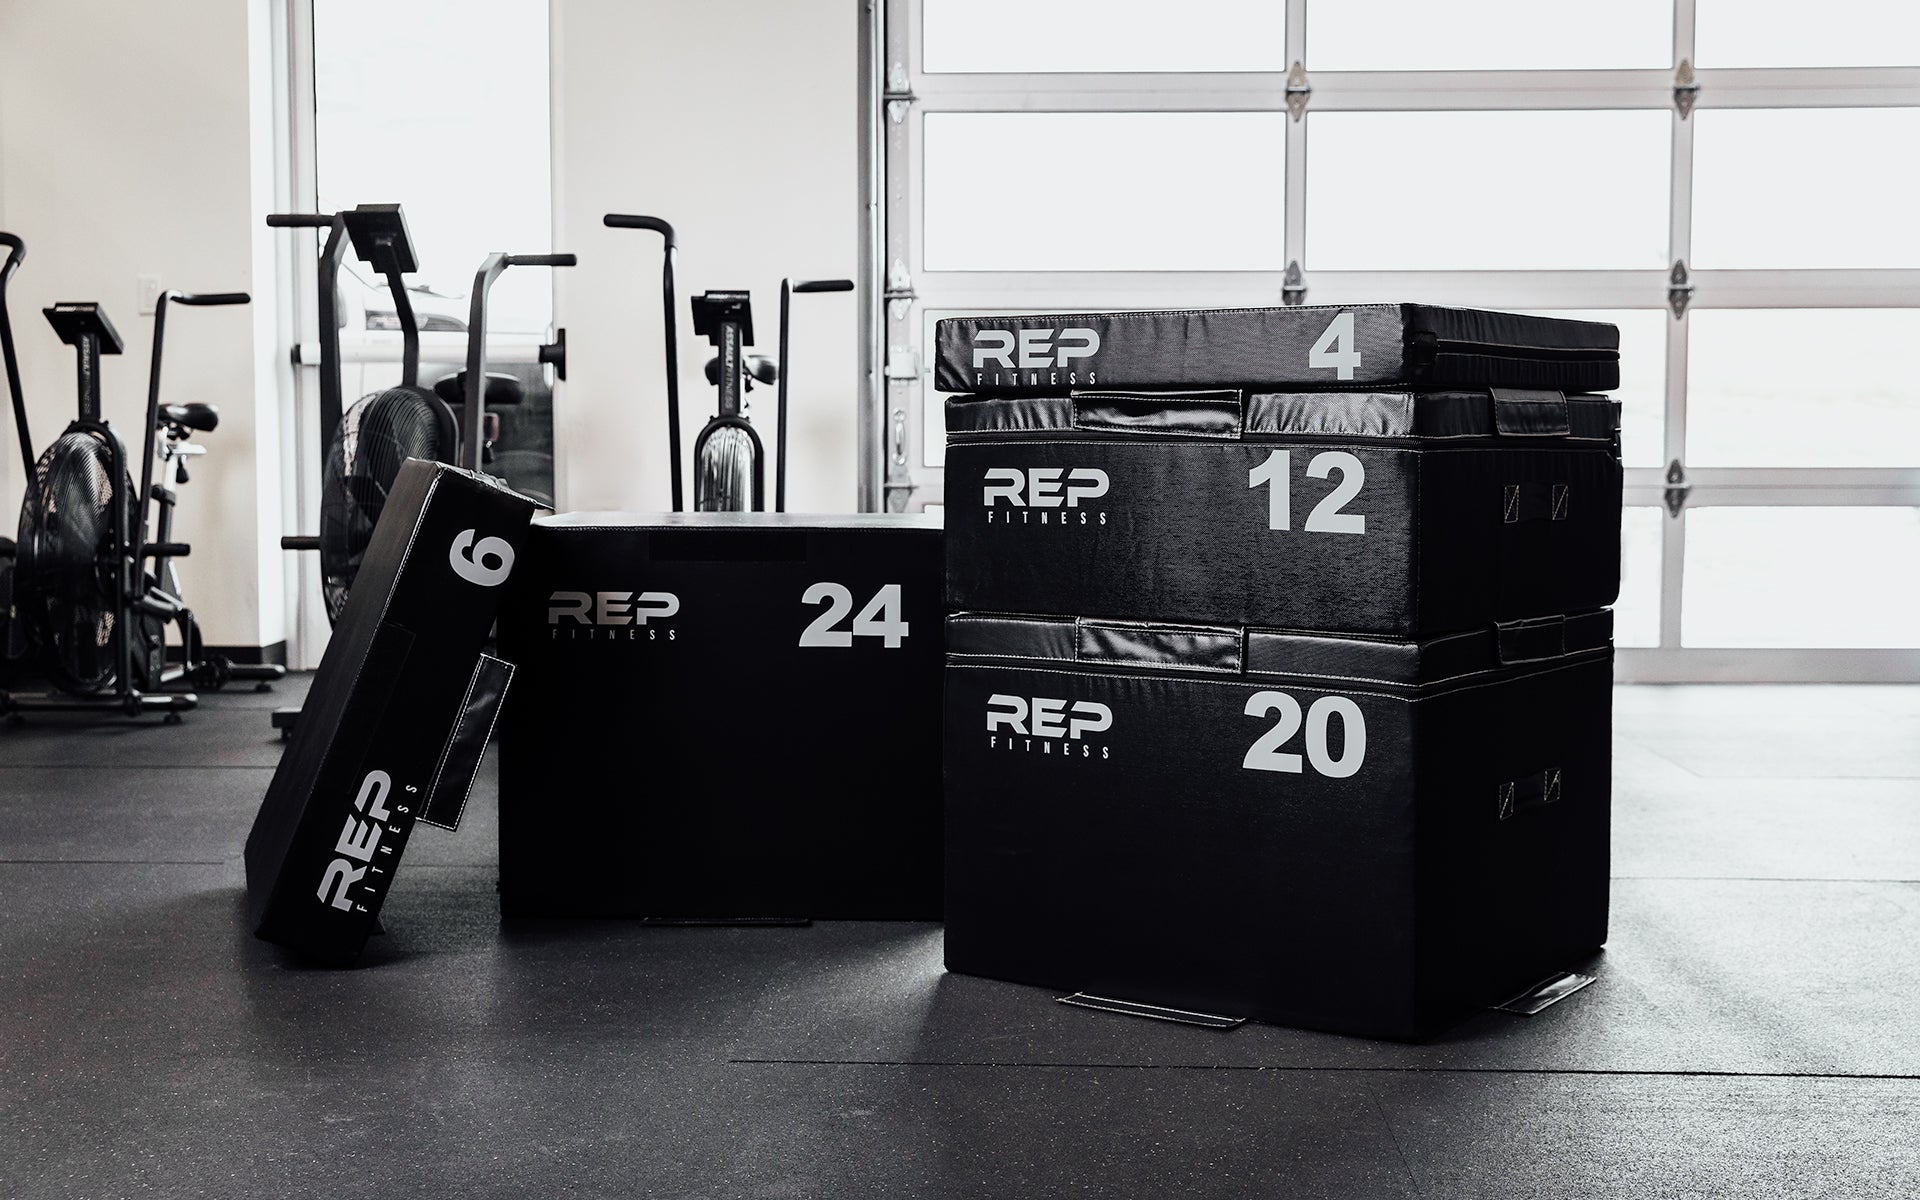 Full set of REP Stackable Soft Foam Plyo Boxes in a gym setting.